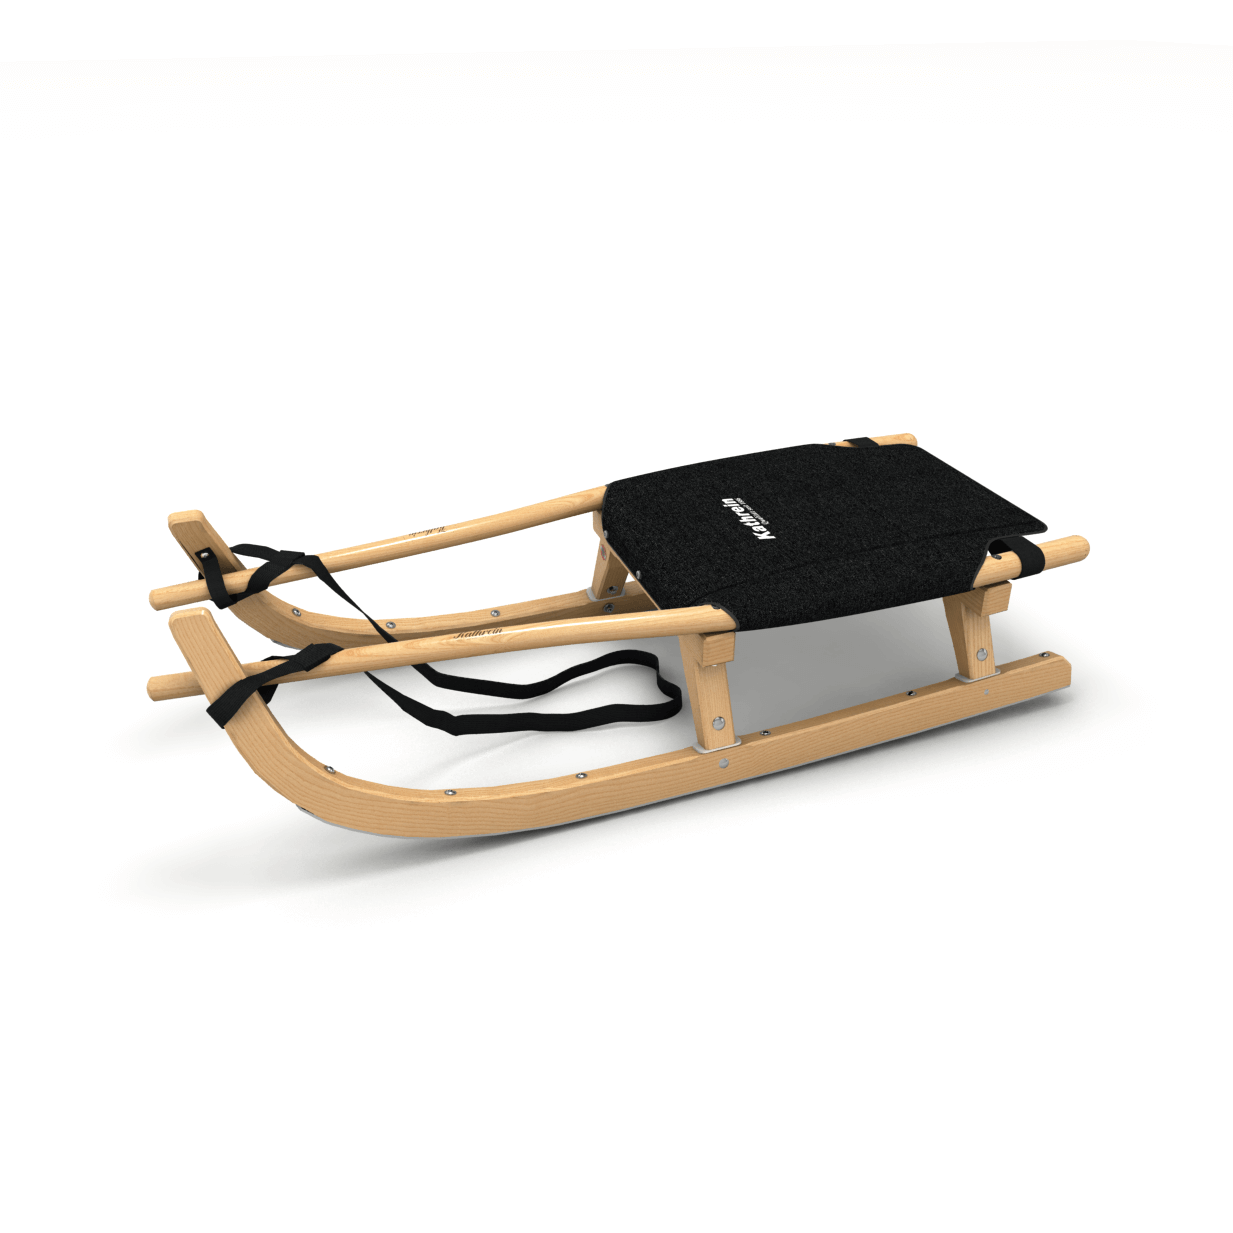 Toboggan (105cm) with seat cushions from approx. 10 years of age